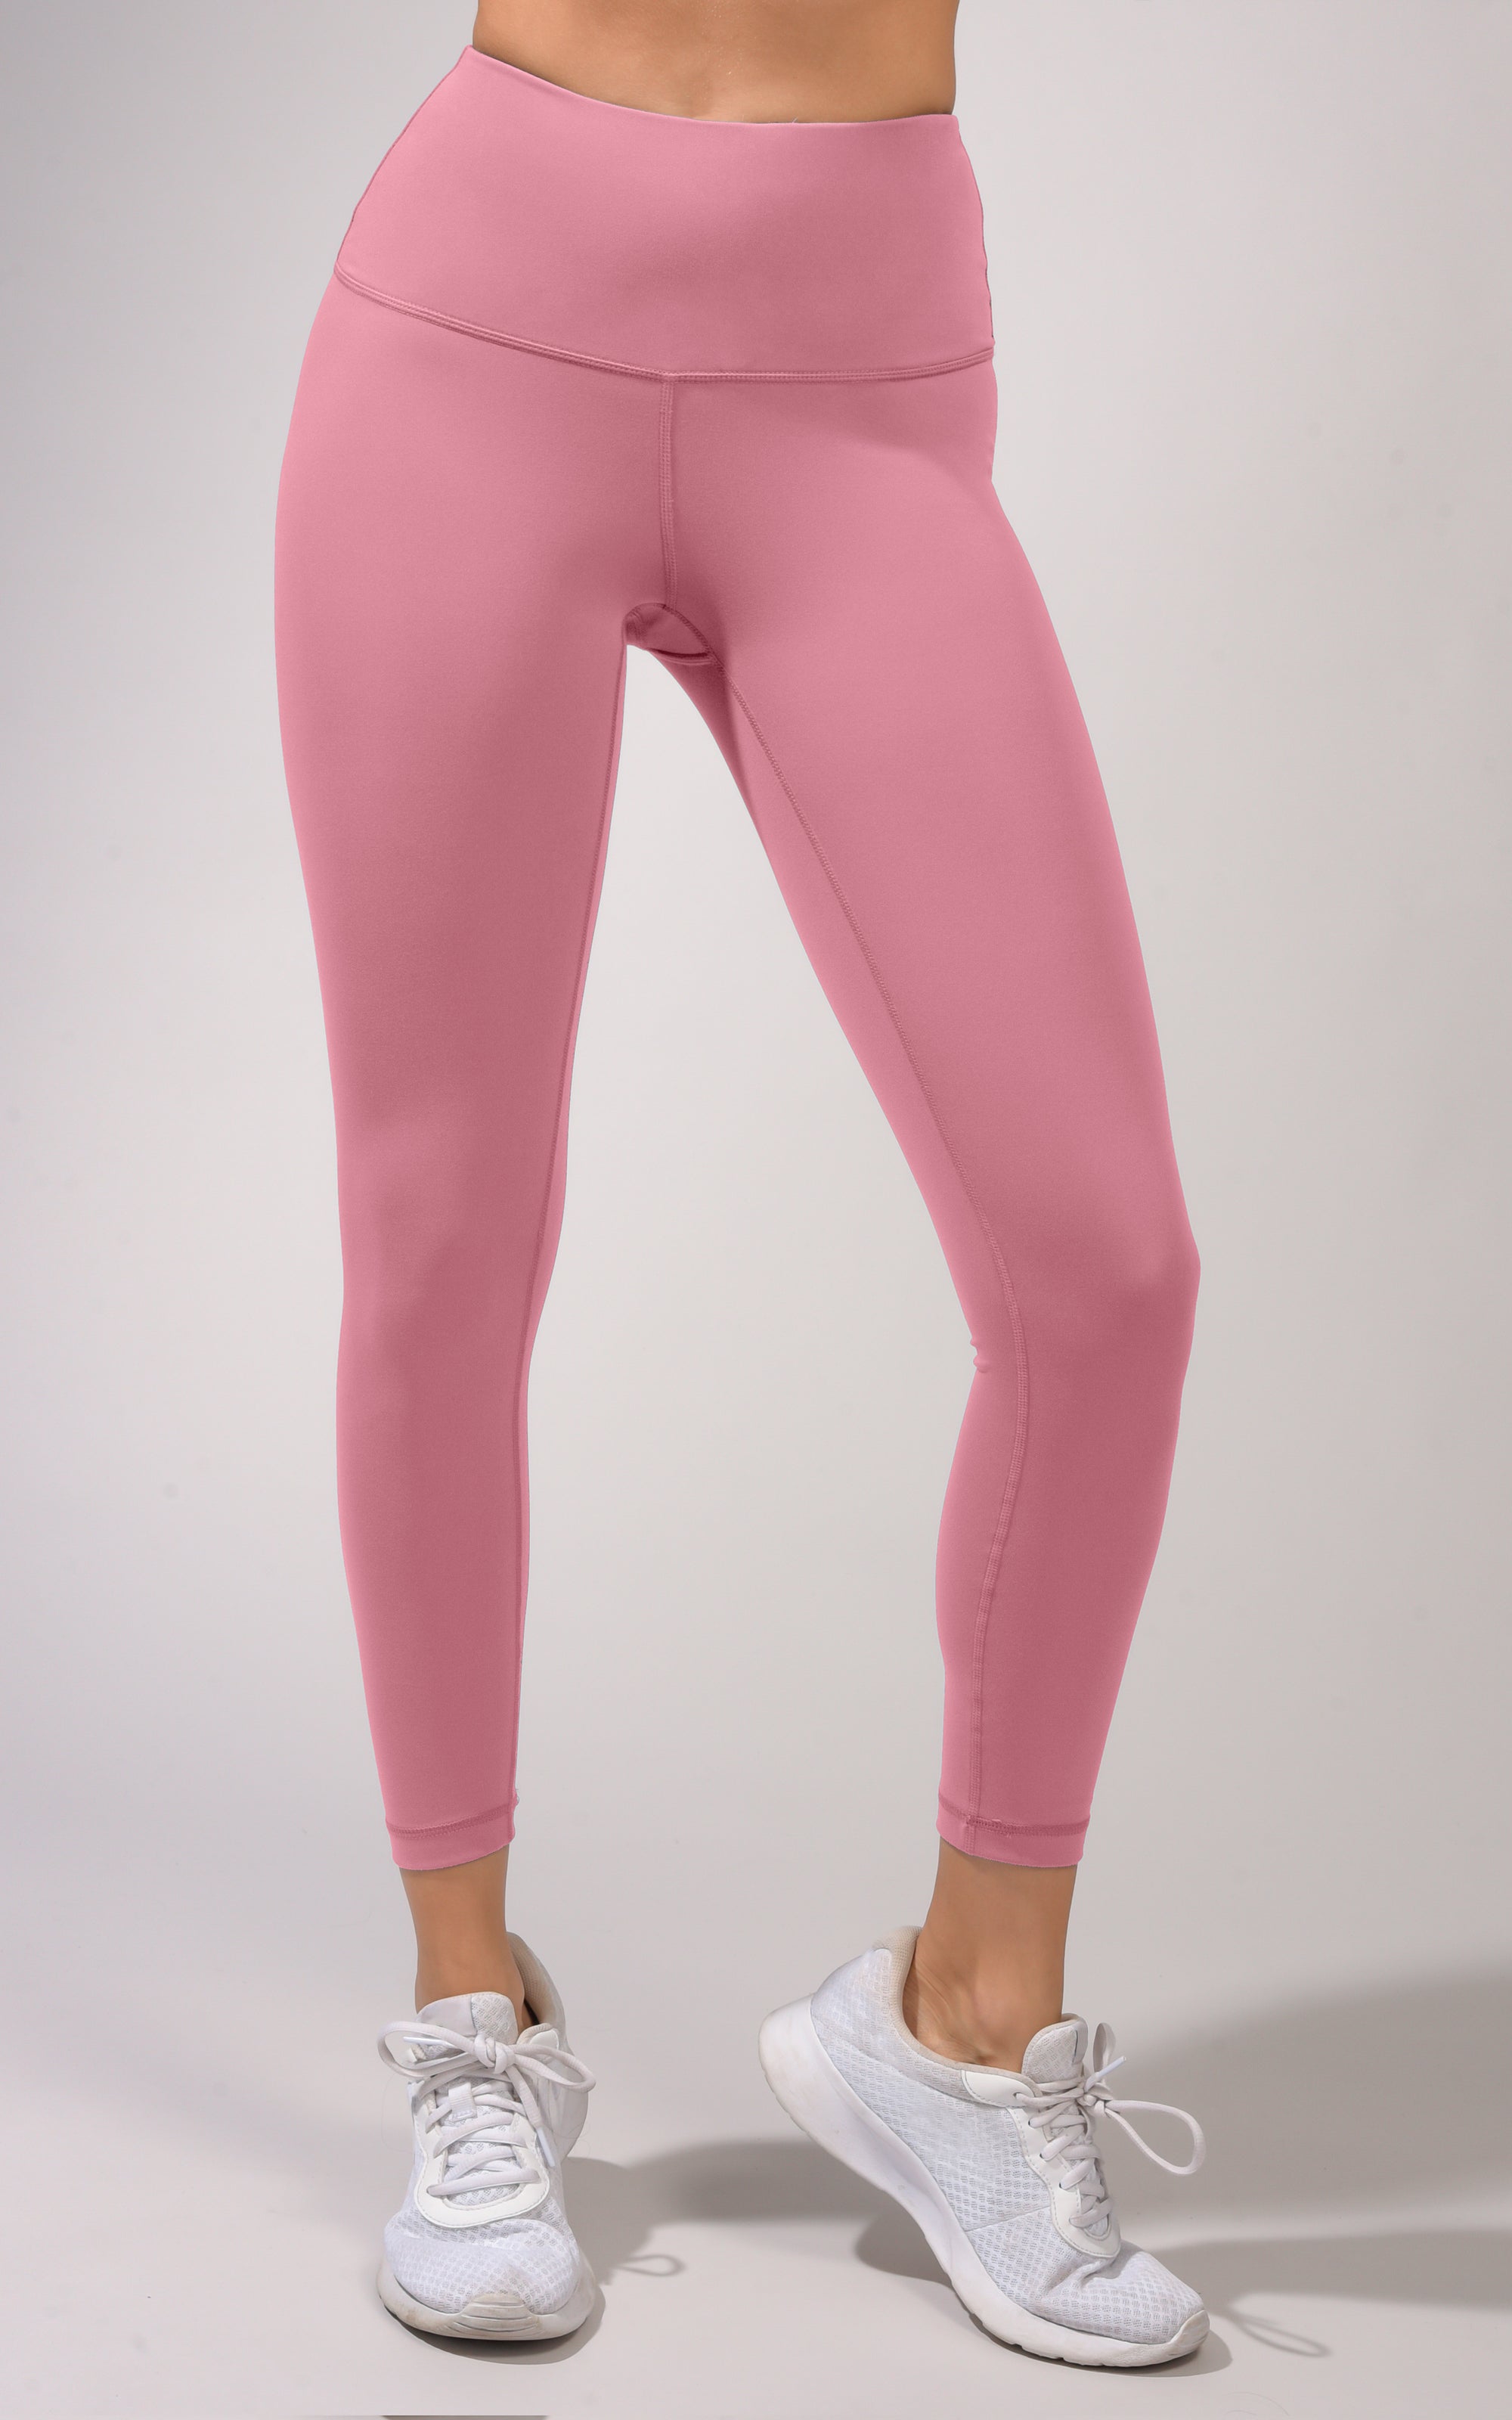 Yogalicious Leggings Women's Small RN144527 Pink Mesh On Sides Pre-Owned